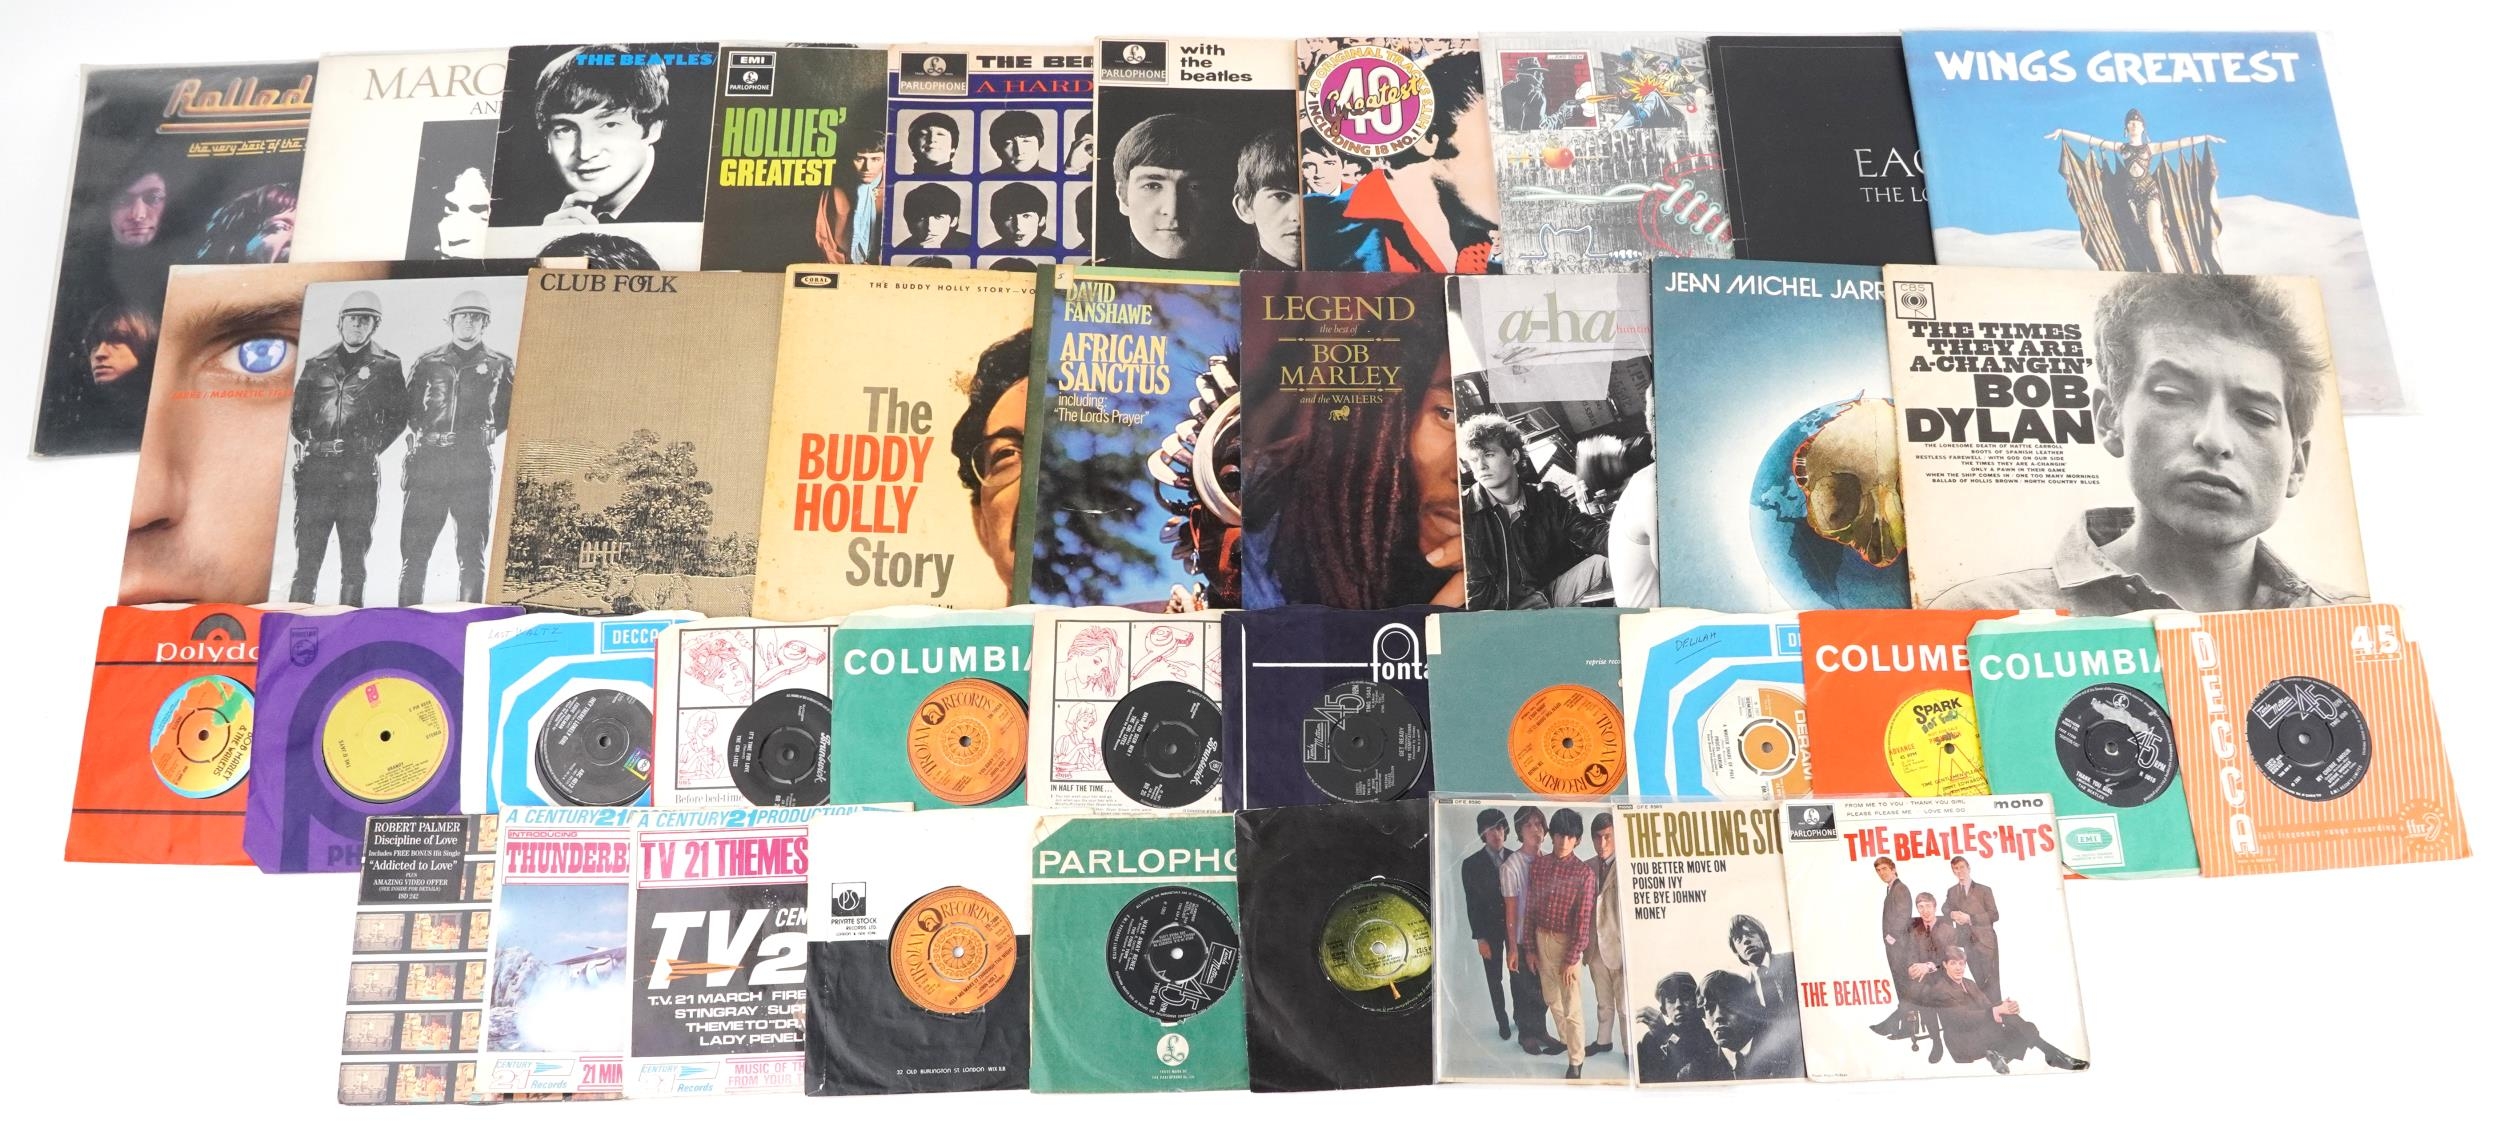 Vinyl LP records and 45rpms including Marc Bolan & T Rex, The Beatles, The Eagles, Wings, Bob